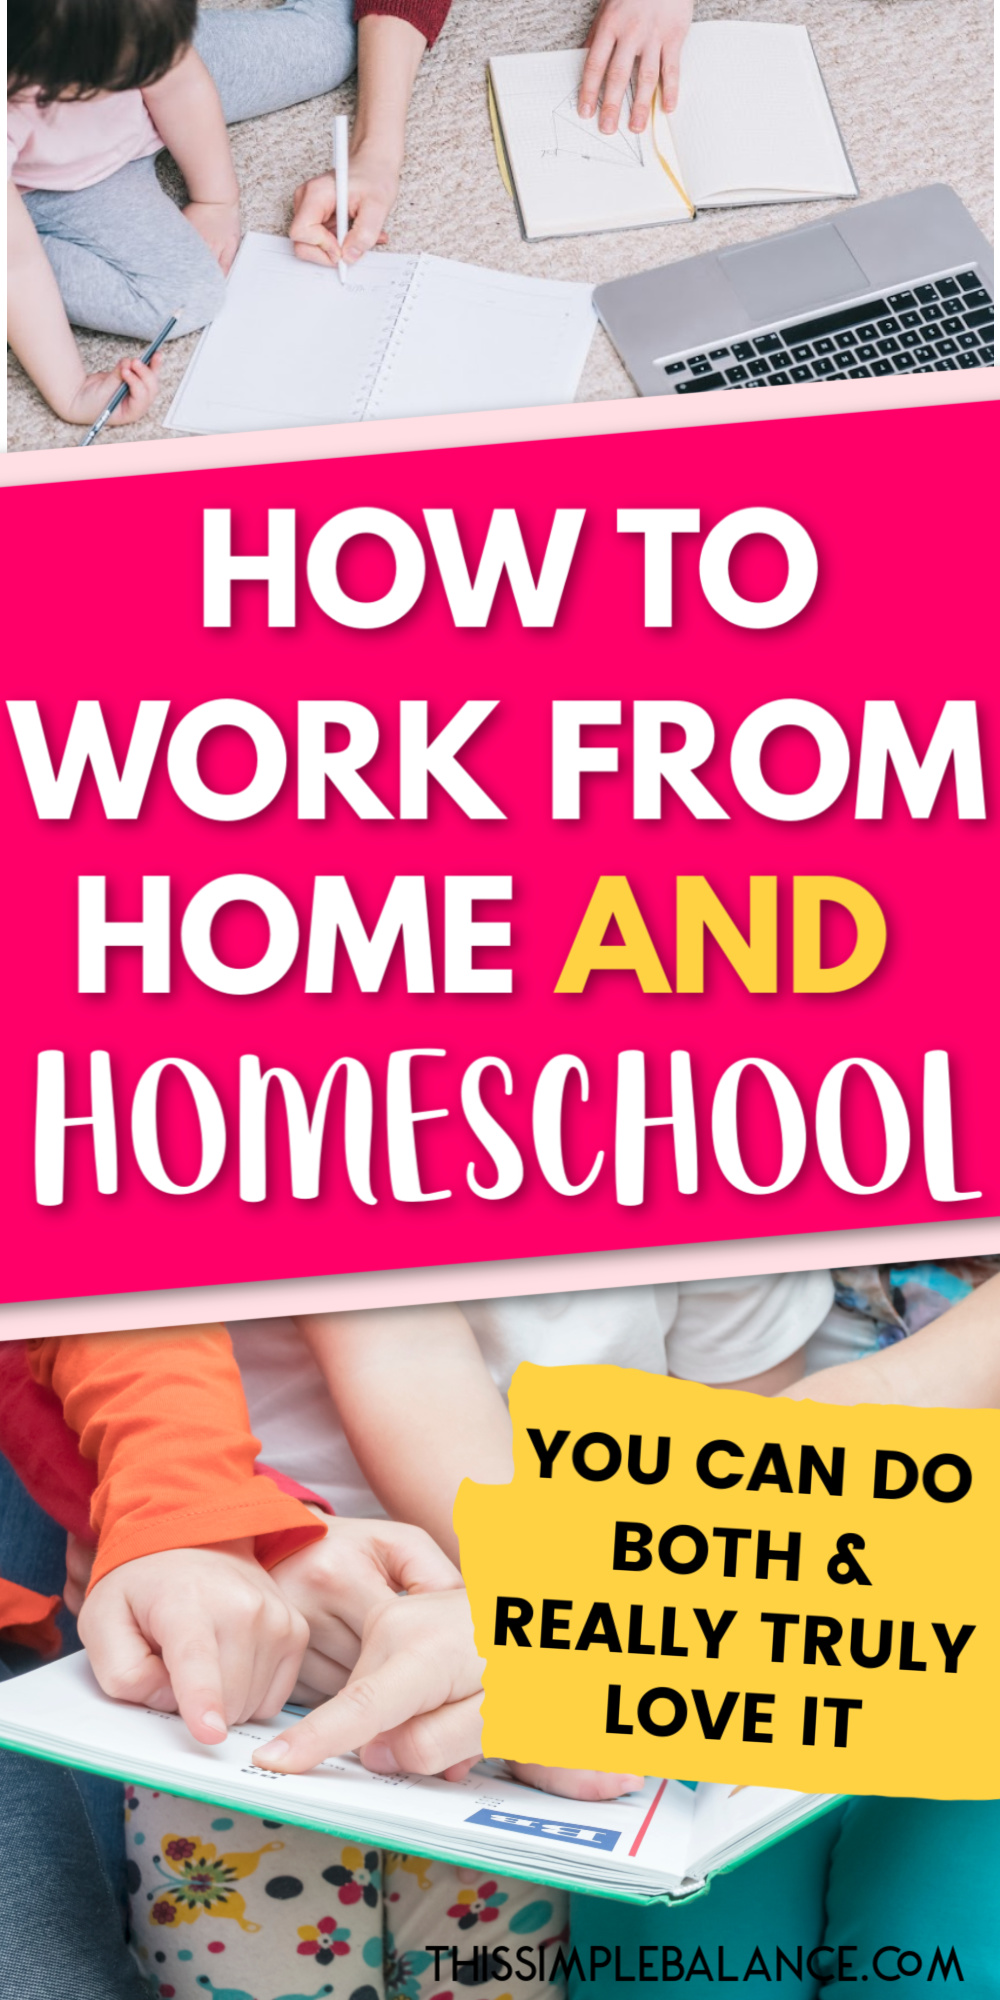 mom working with child on homeschool work, text "how to work from home and homeschool - you can do both & really truly love it", mom and children reading book together, point things out on the page